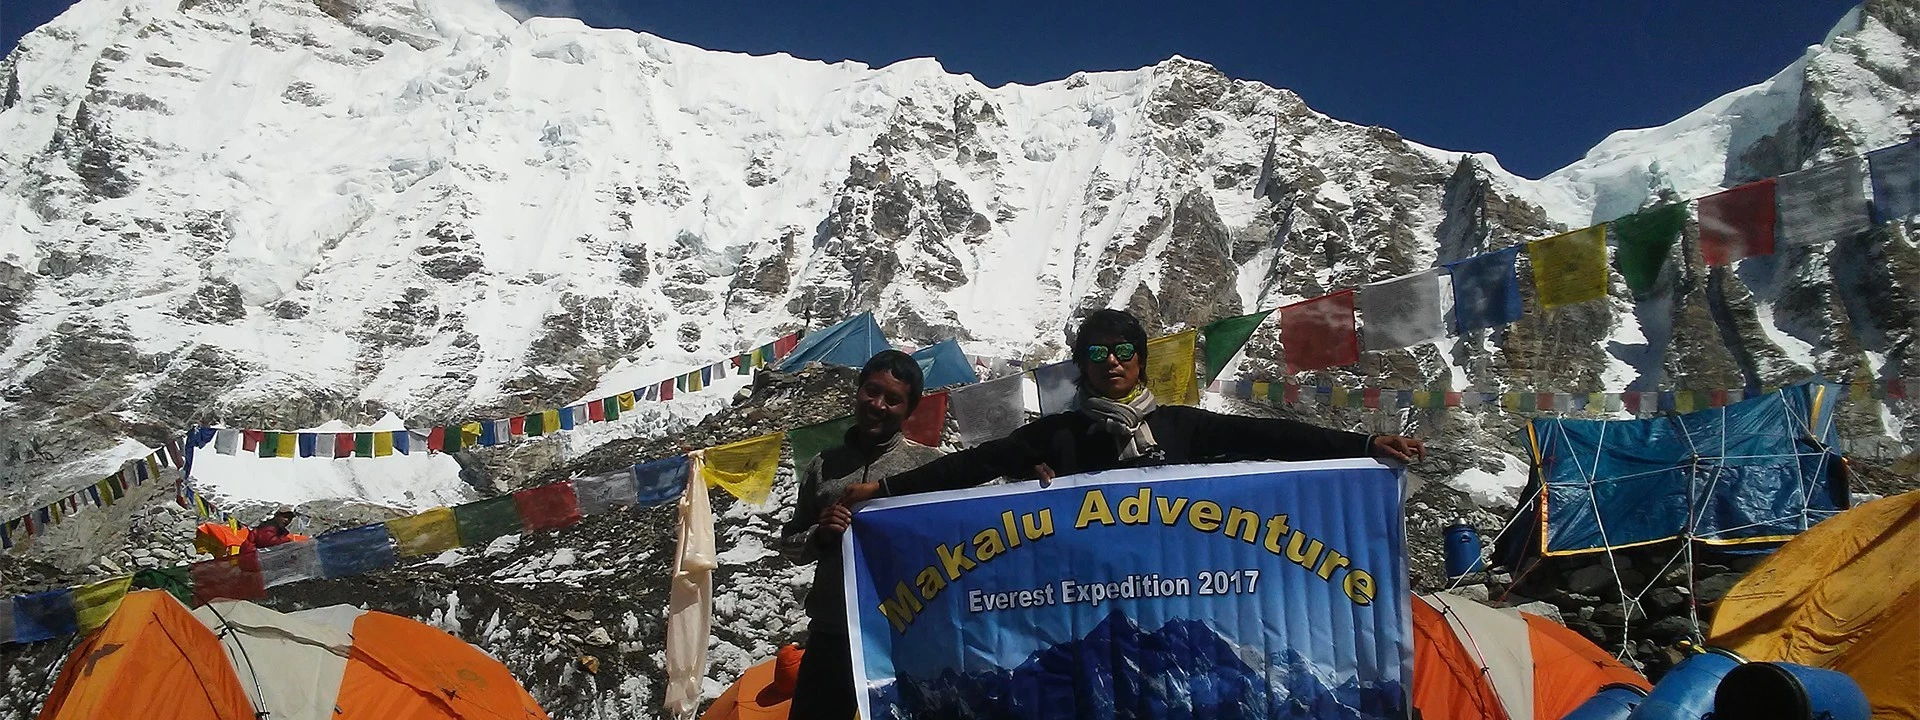 Everest Expedition from South Side